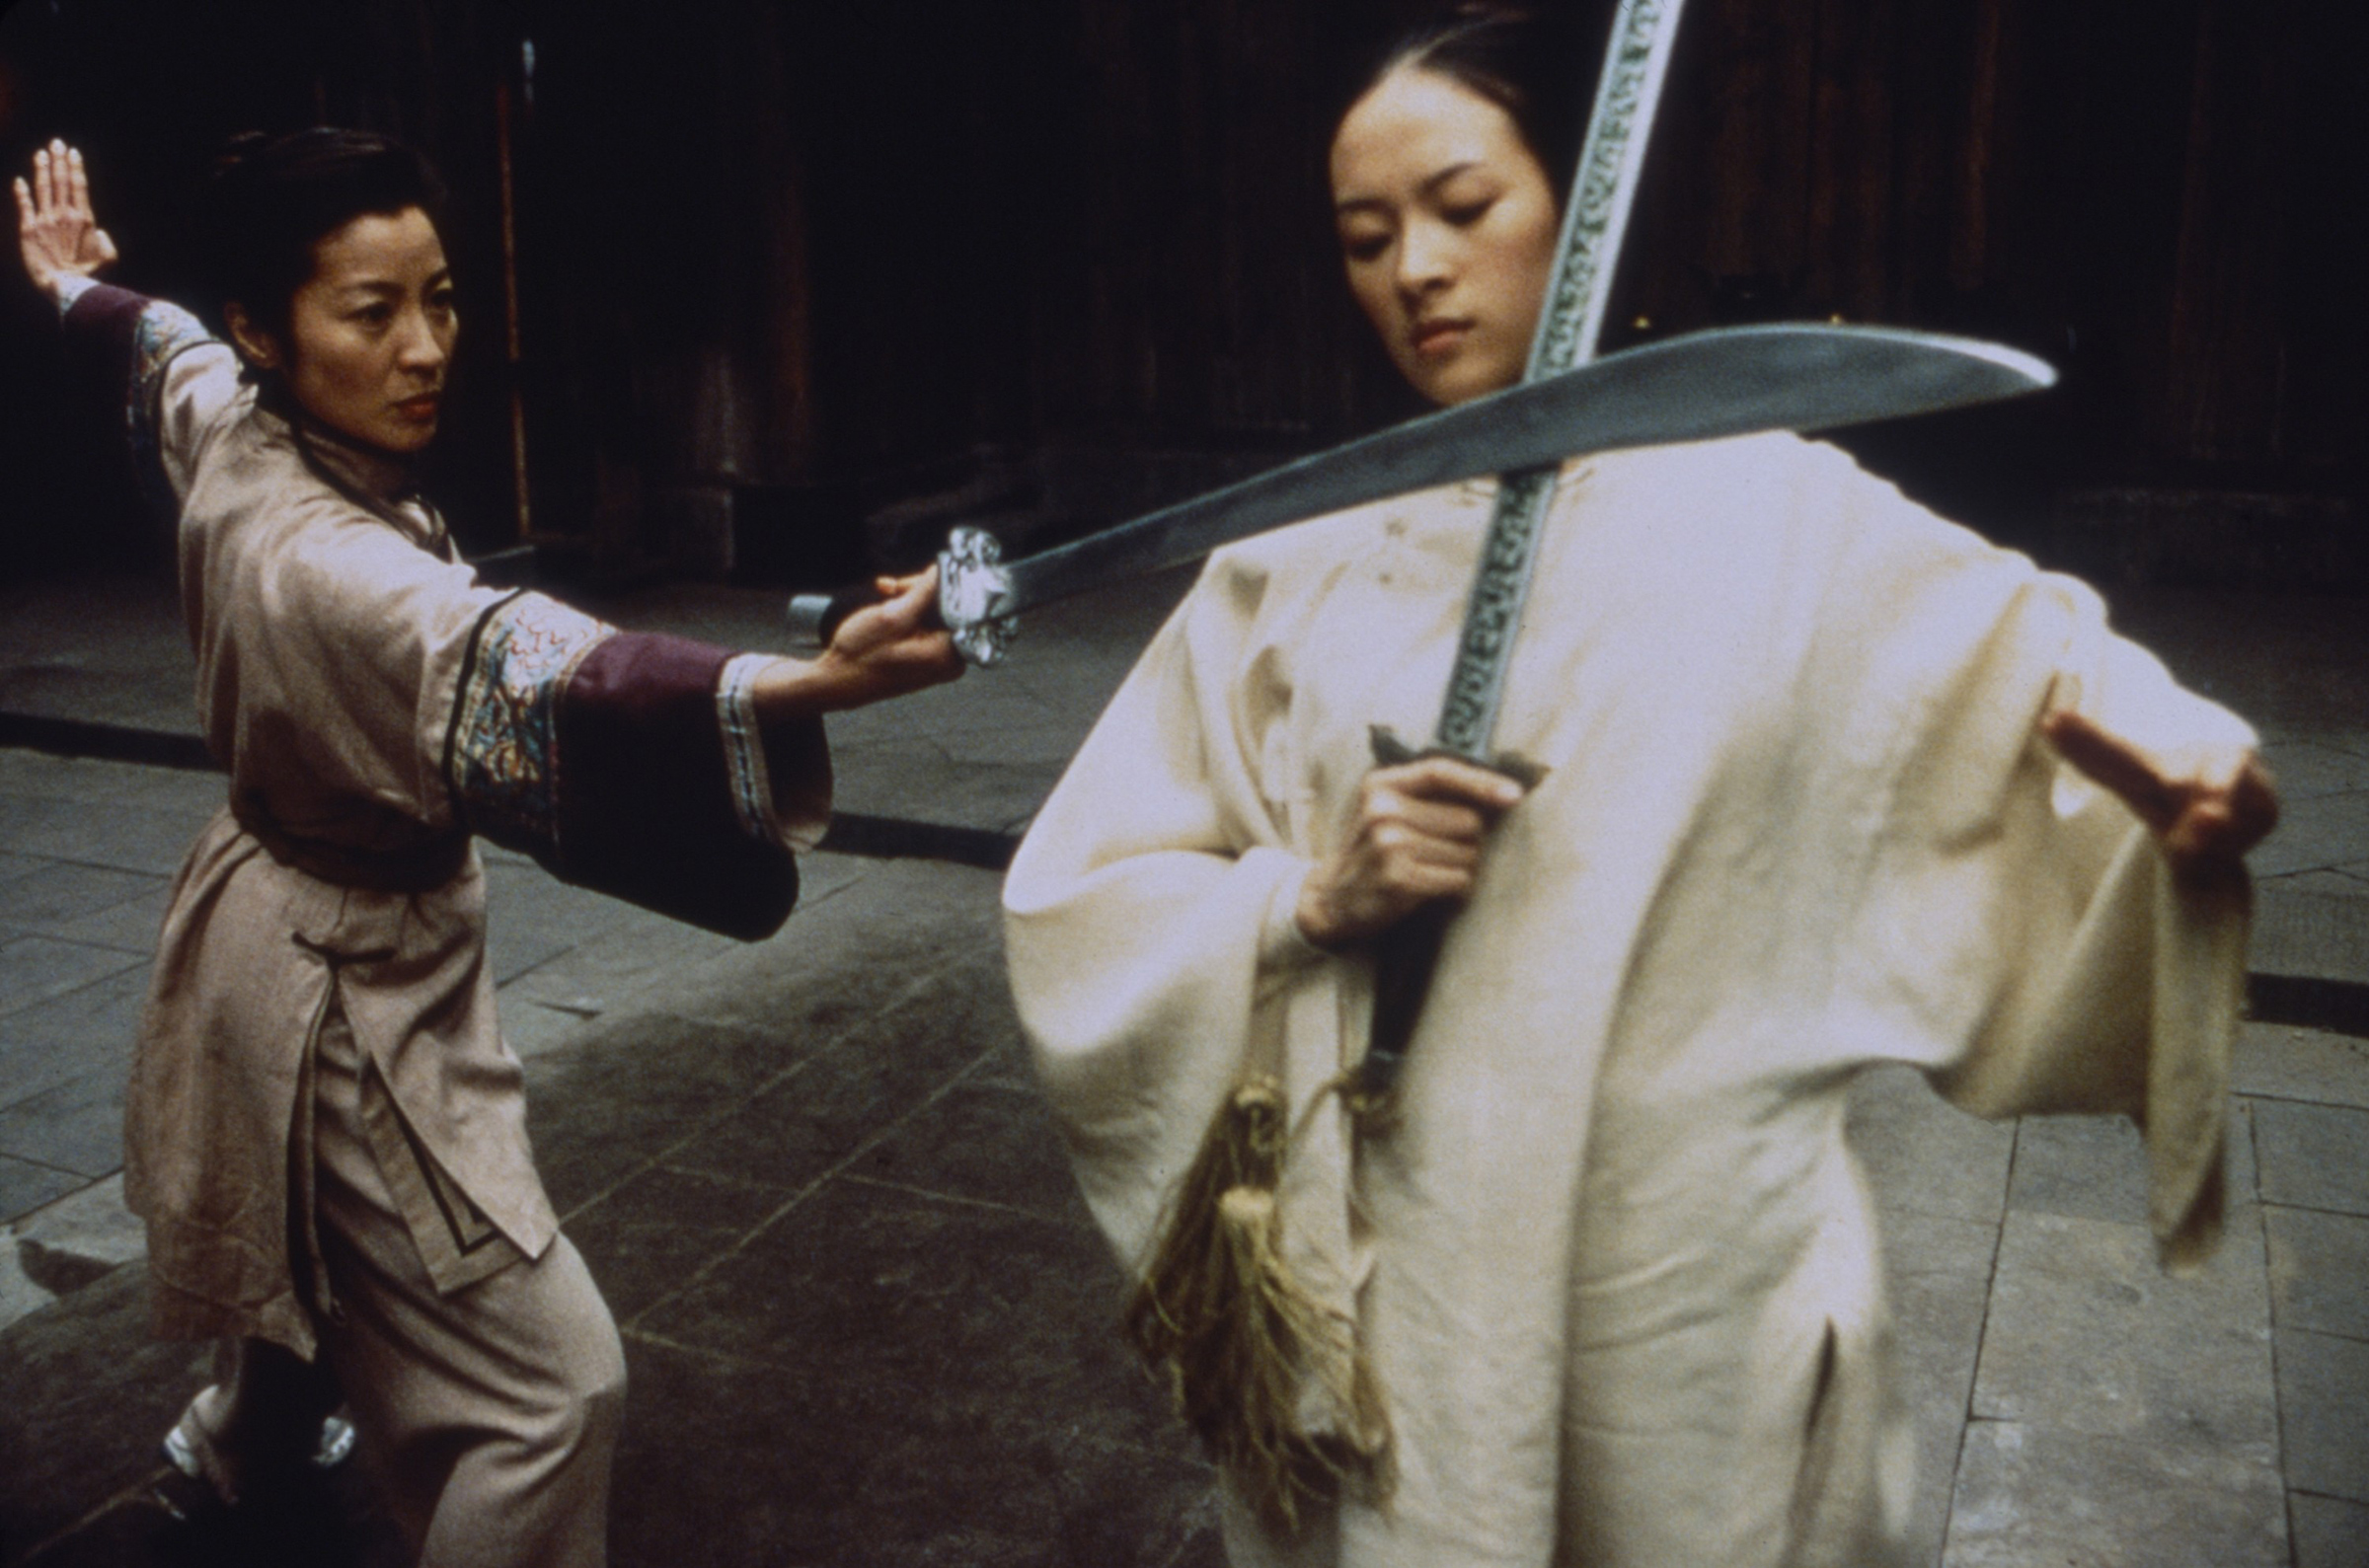 Yeoh in Crouching Tiger, Hidden Dragon, alongside Zhang Ziyi in 2000. (Chan Kam Chuen—Sony Pictures/Everett Collection)